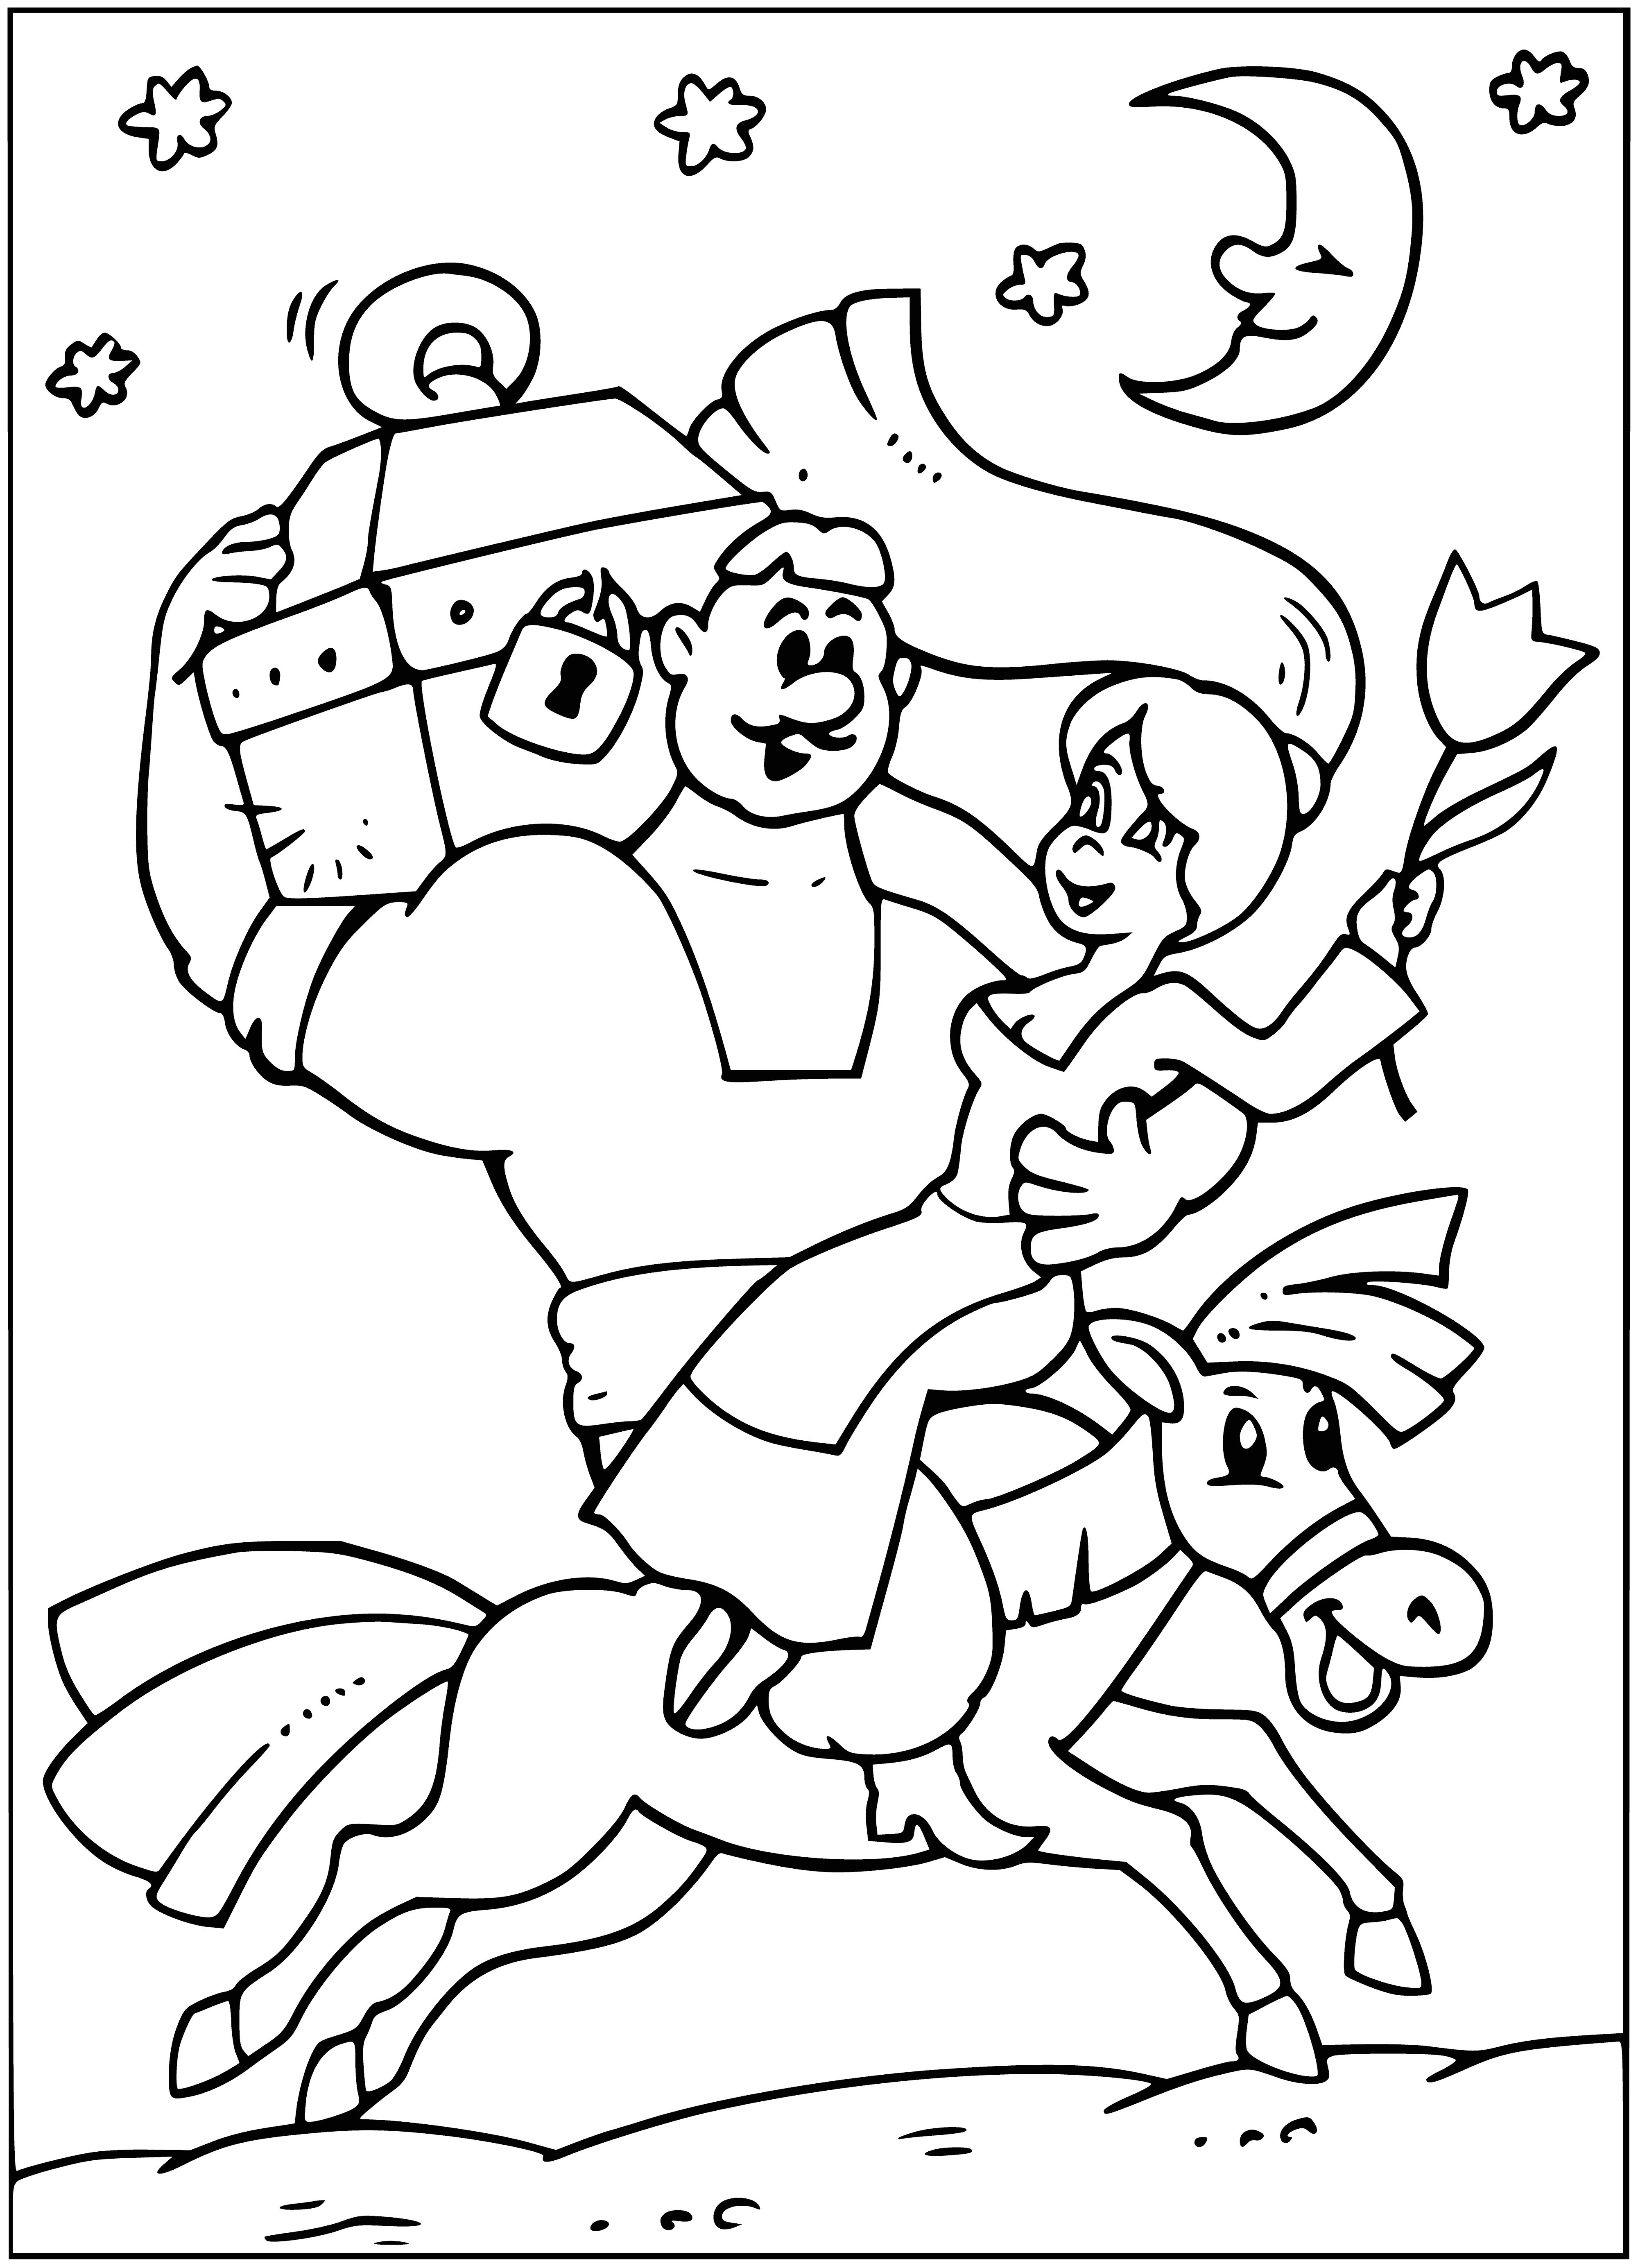 coloring page: Cossacks march in a wedding procession, dressed traditionally & carrying musical instruments. #wedding #music #Cossacks